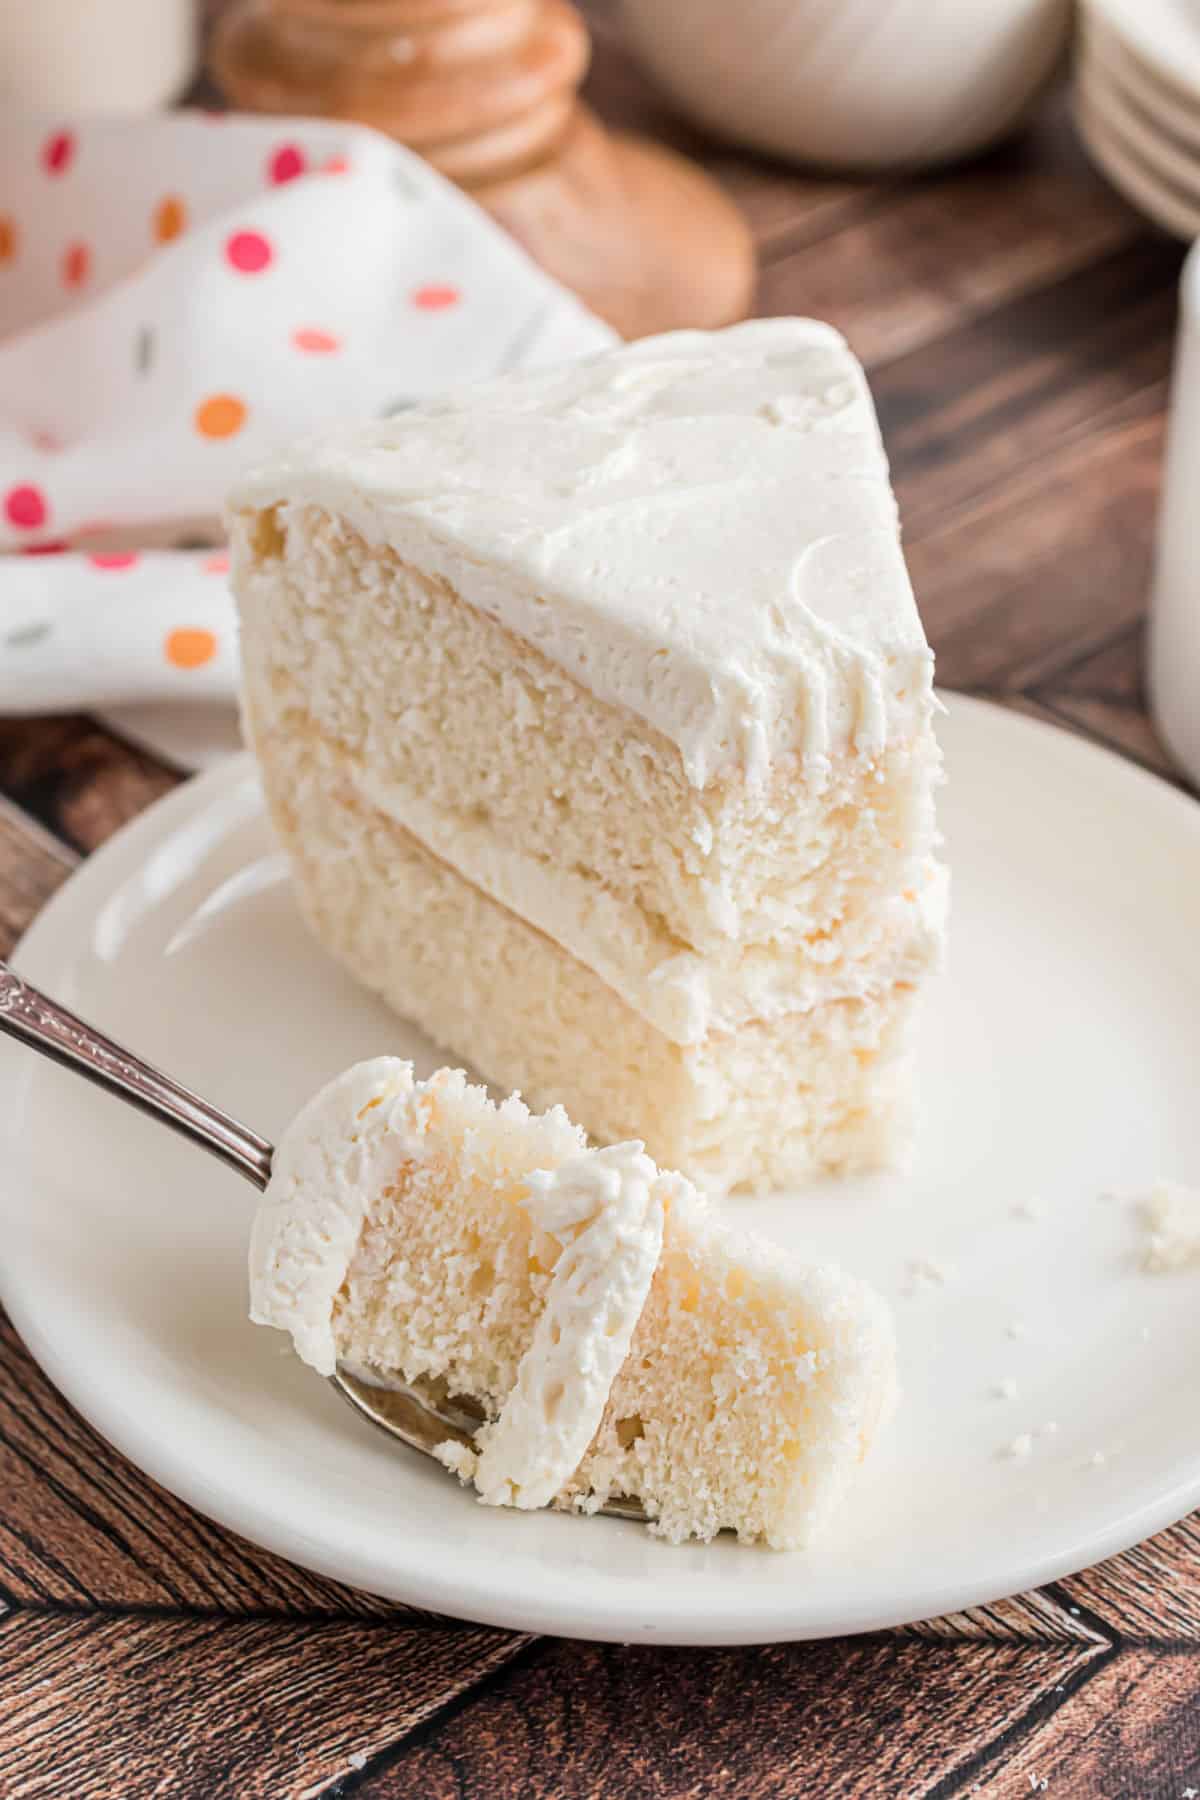 Slice of white cake with a bite taken out.